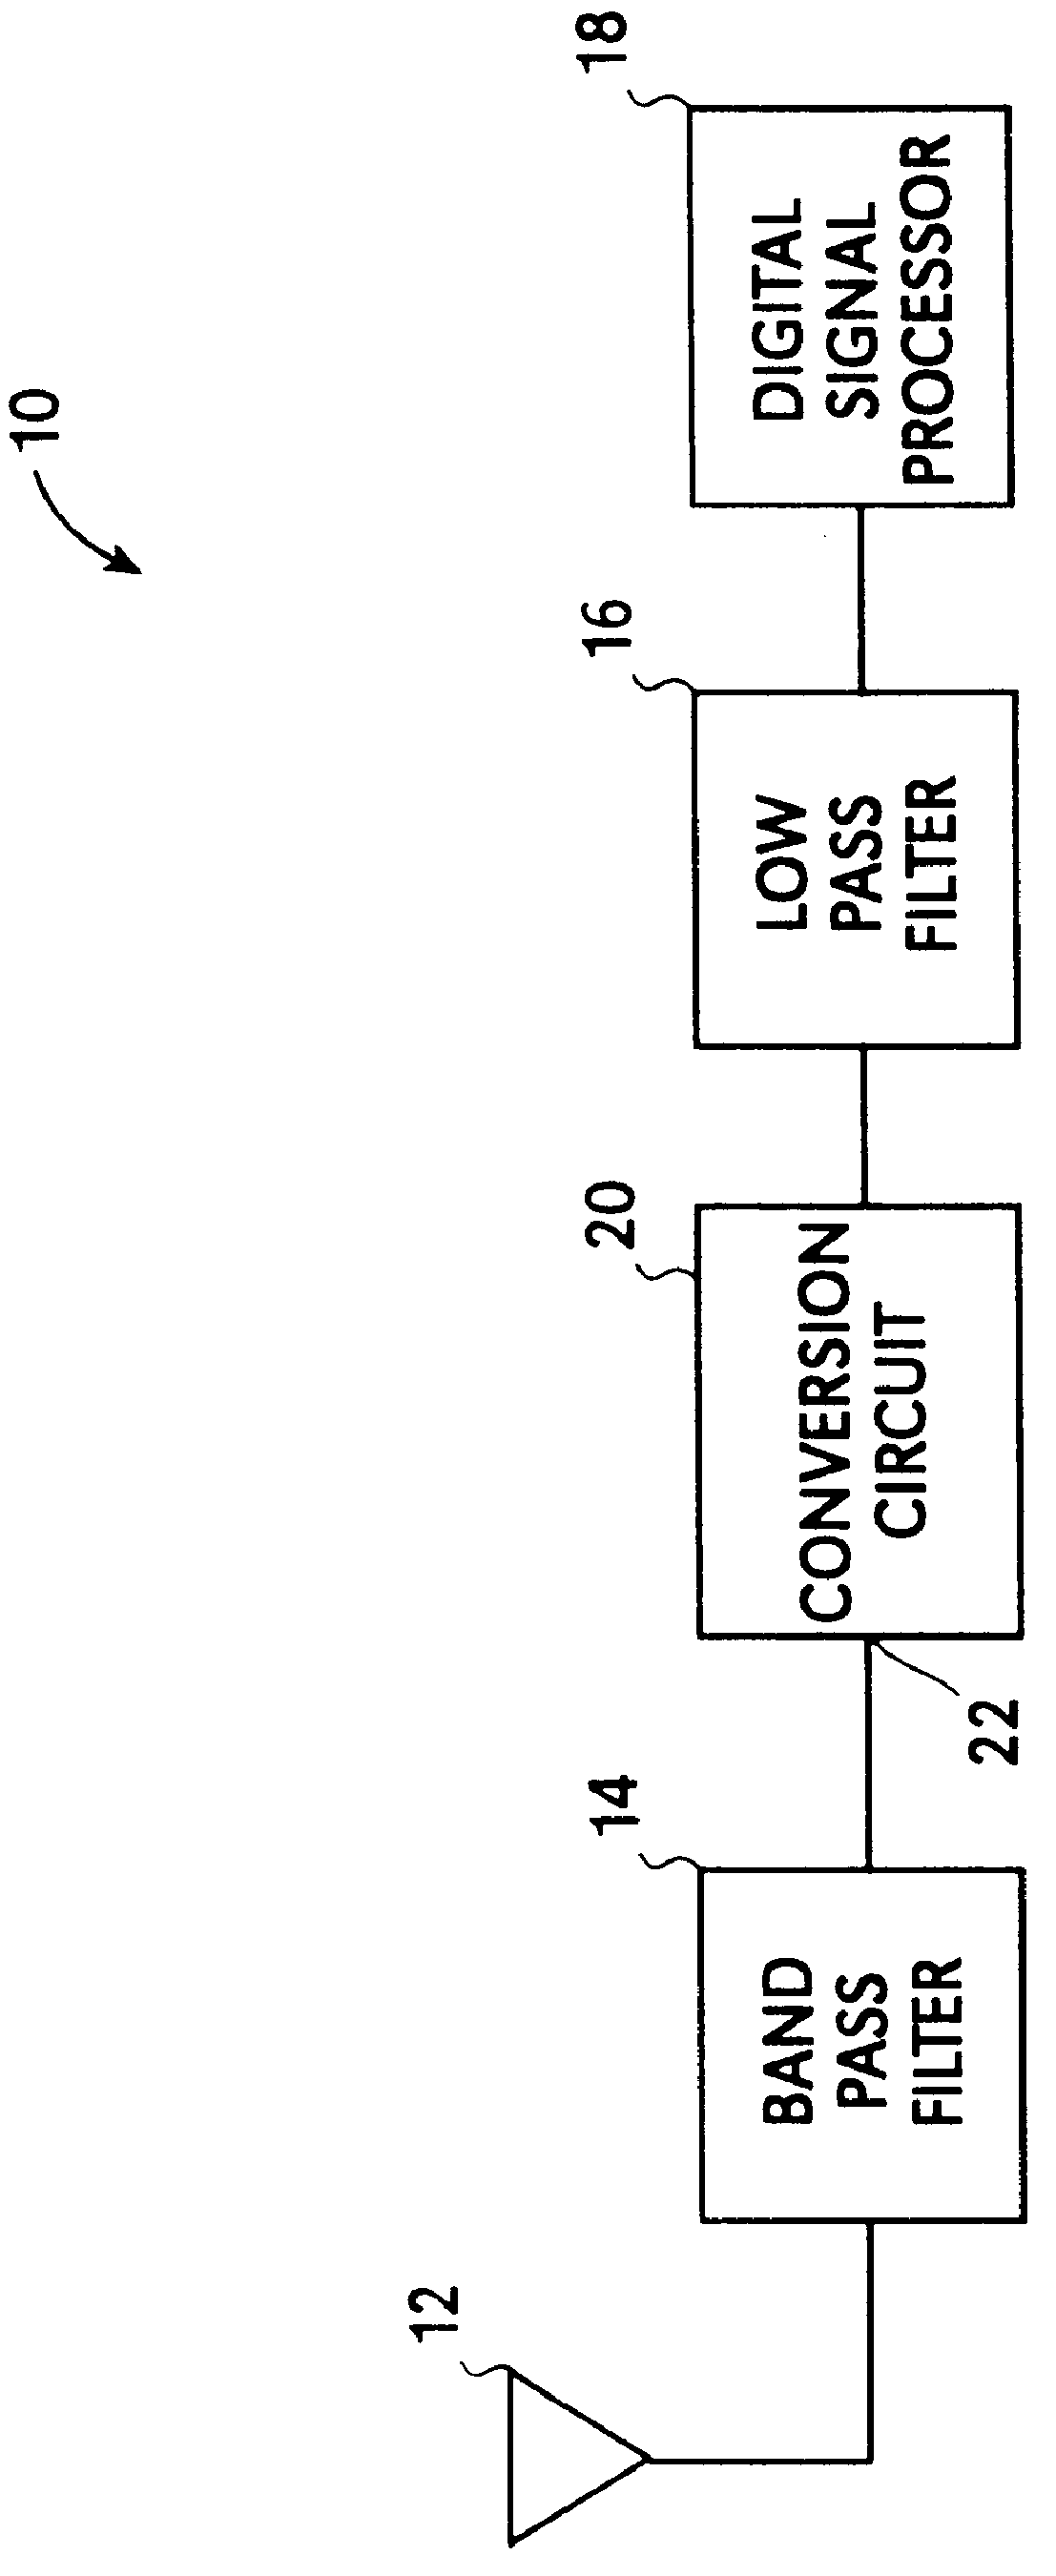 Direct conversion receiver with reduced even order distortion